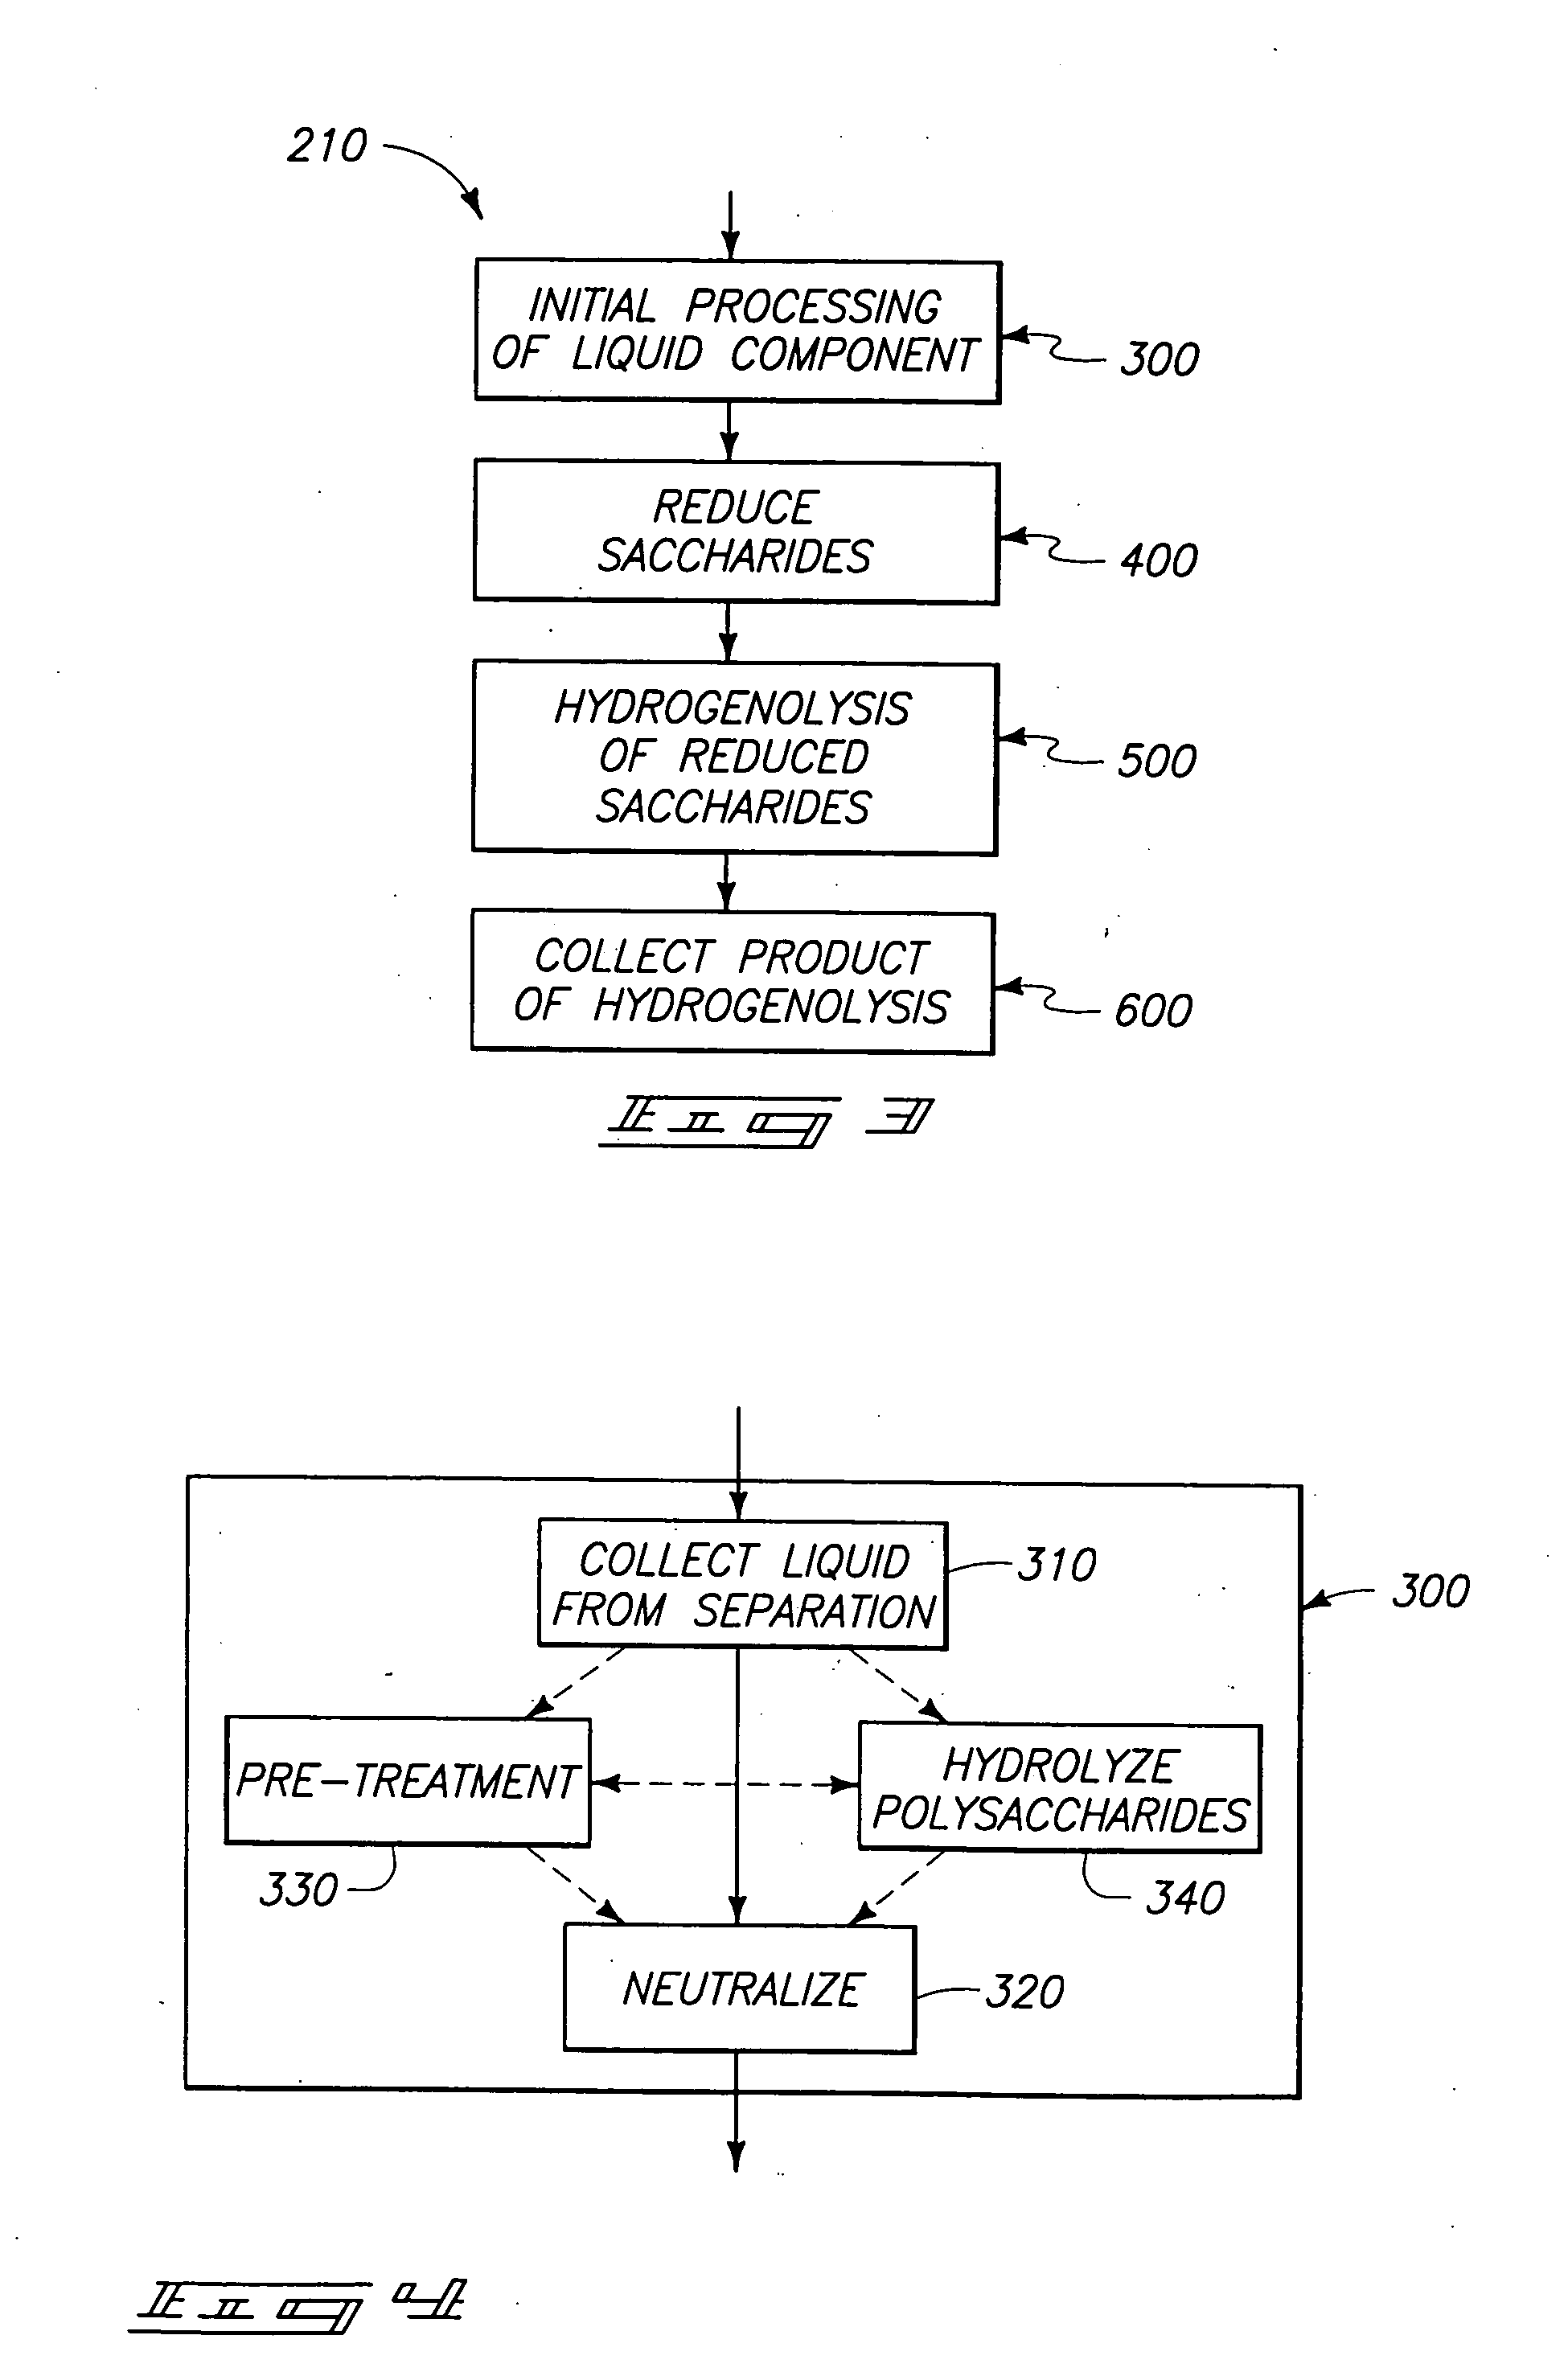 Methods of producing compounds from plant materials